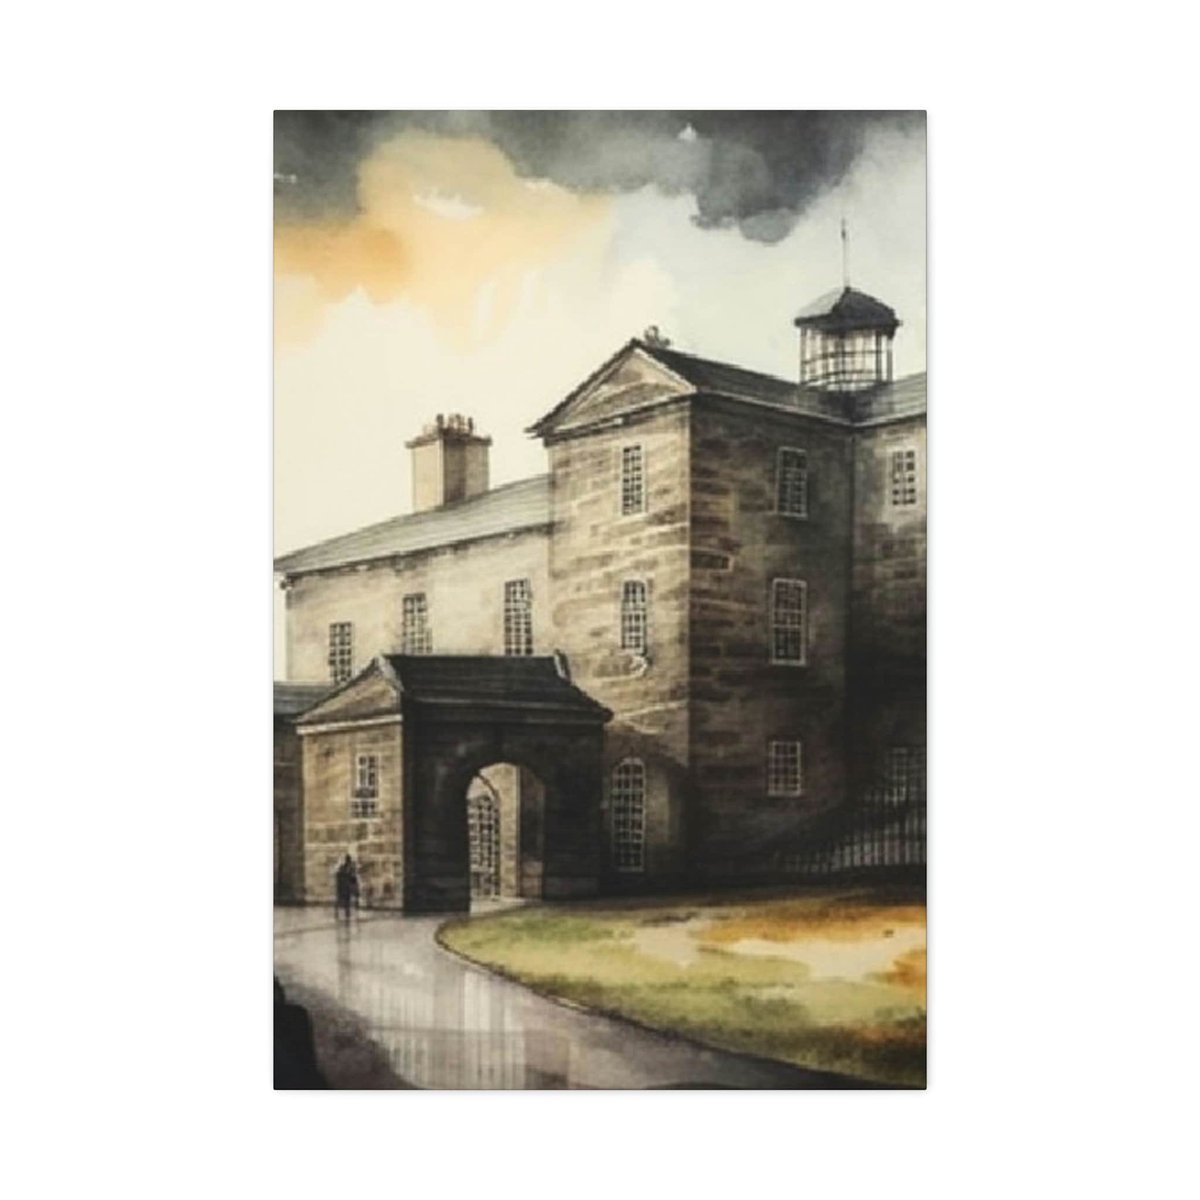 Excited to share this item from my #etsy shop: Beautiful Dartmoor Prison Watercolour #dartmoorprison #prison #dartmoor #hmpdartmoor #prisons #prisondocumentary #hikingondartmoor #prisoninmates #ukprison etsy.me/3IbXi5w